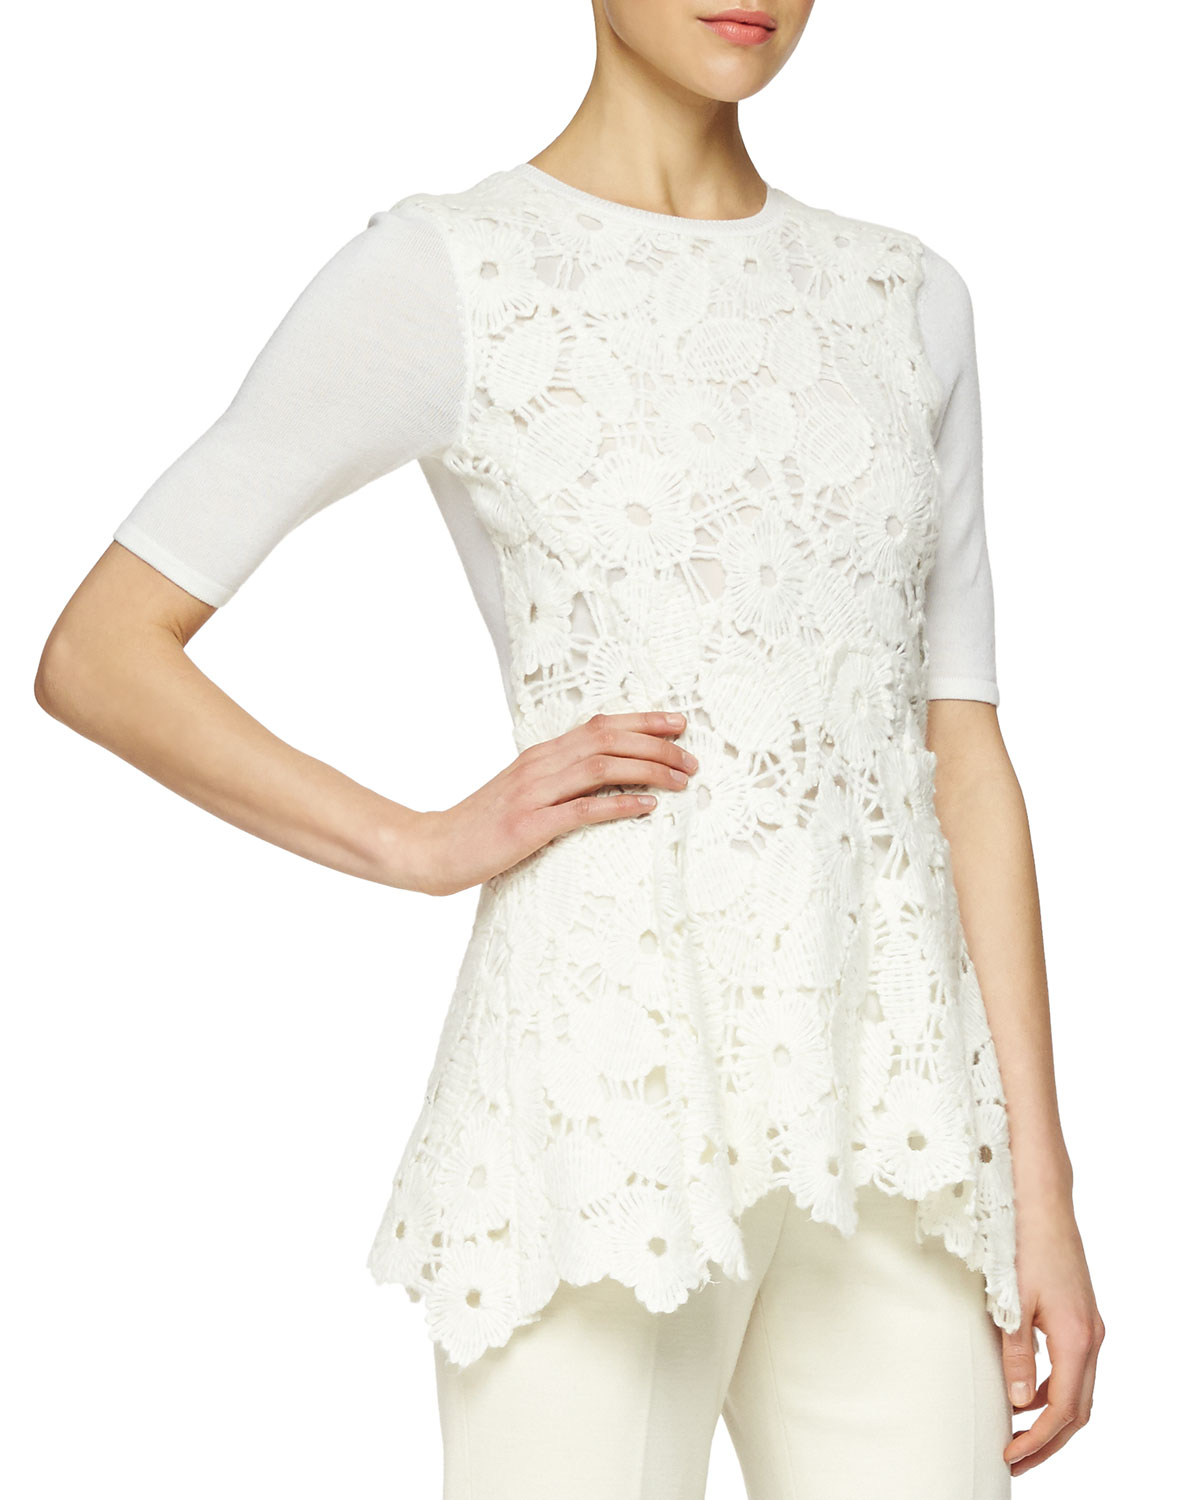 Lela rose Floral Lace Peplum Layered Top | Lyst